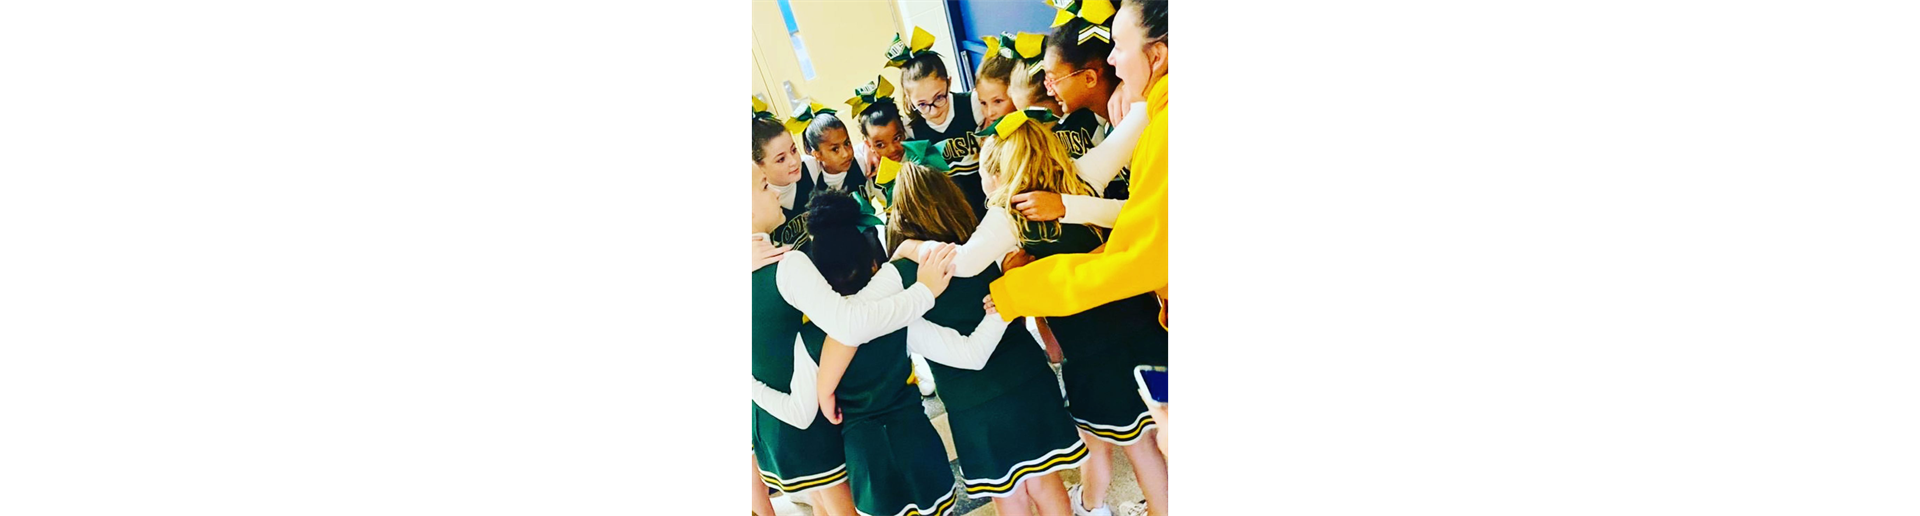 Cheer with a pep talk before the expo.